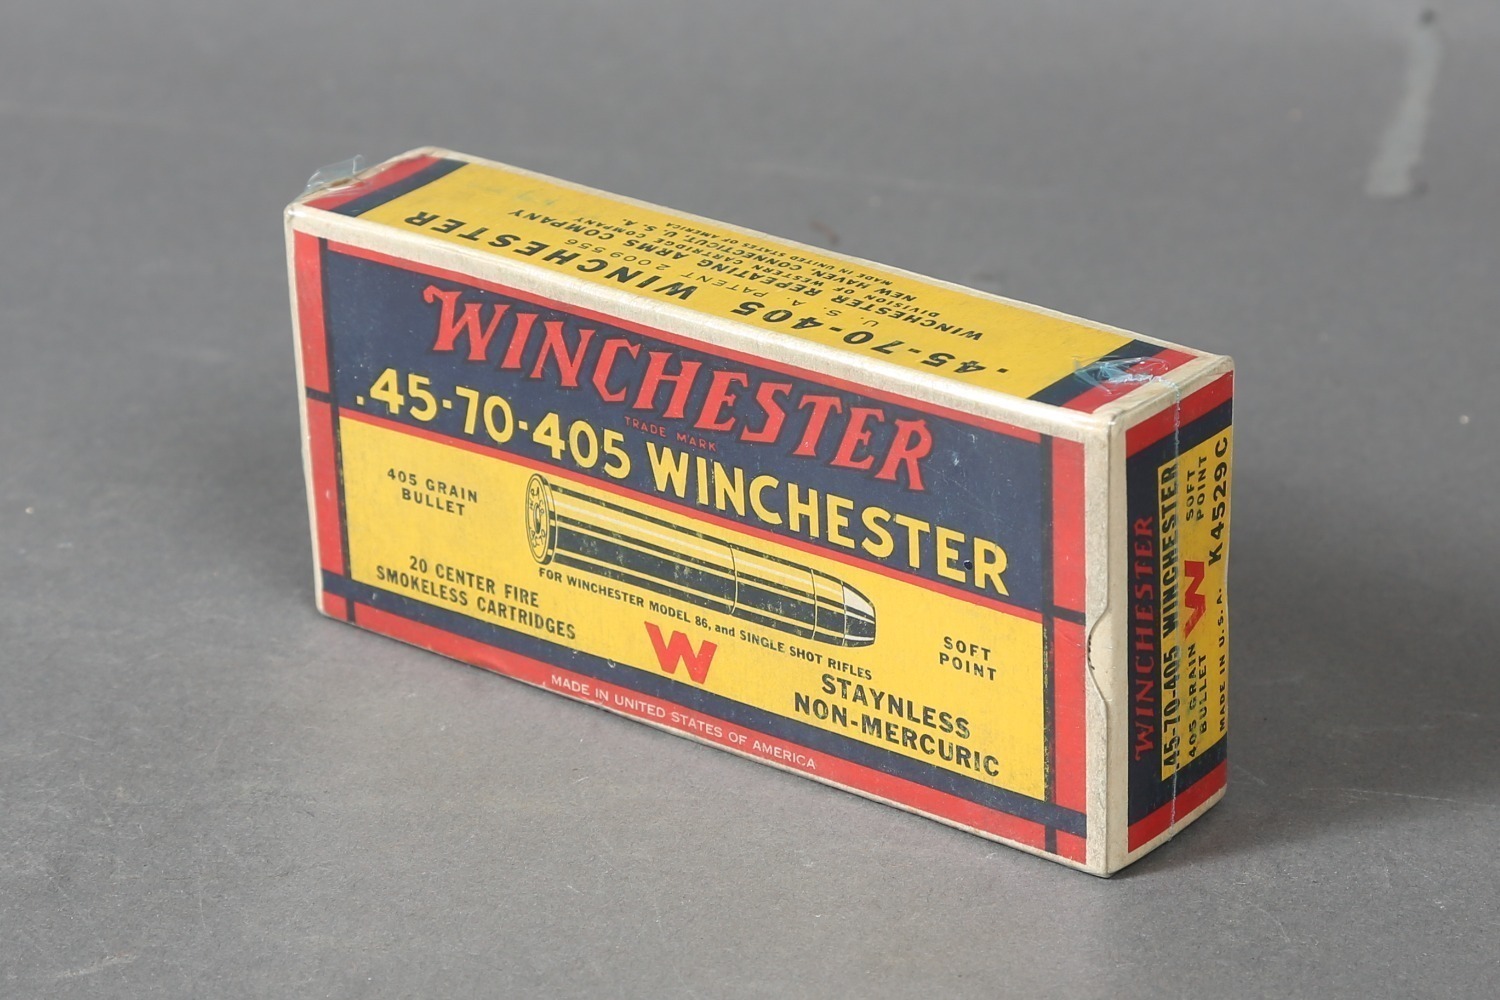 1 Bx Vintage Winchester .45-70 Ammo